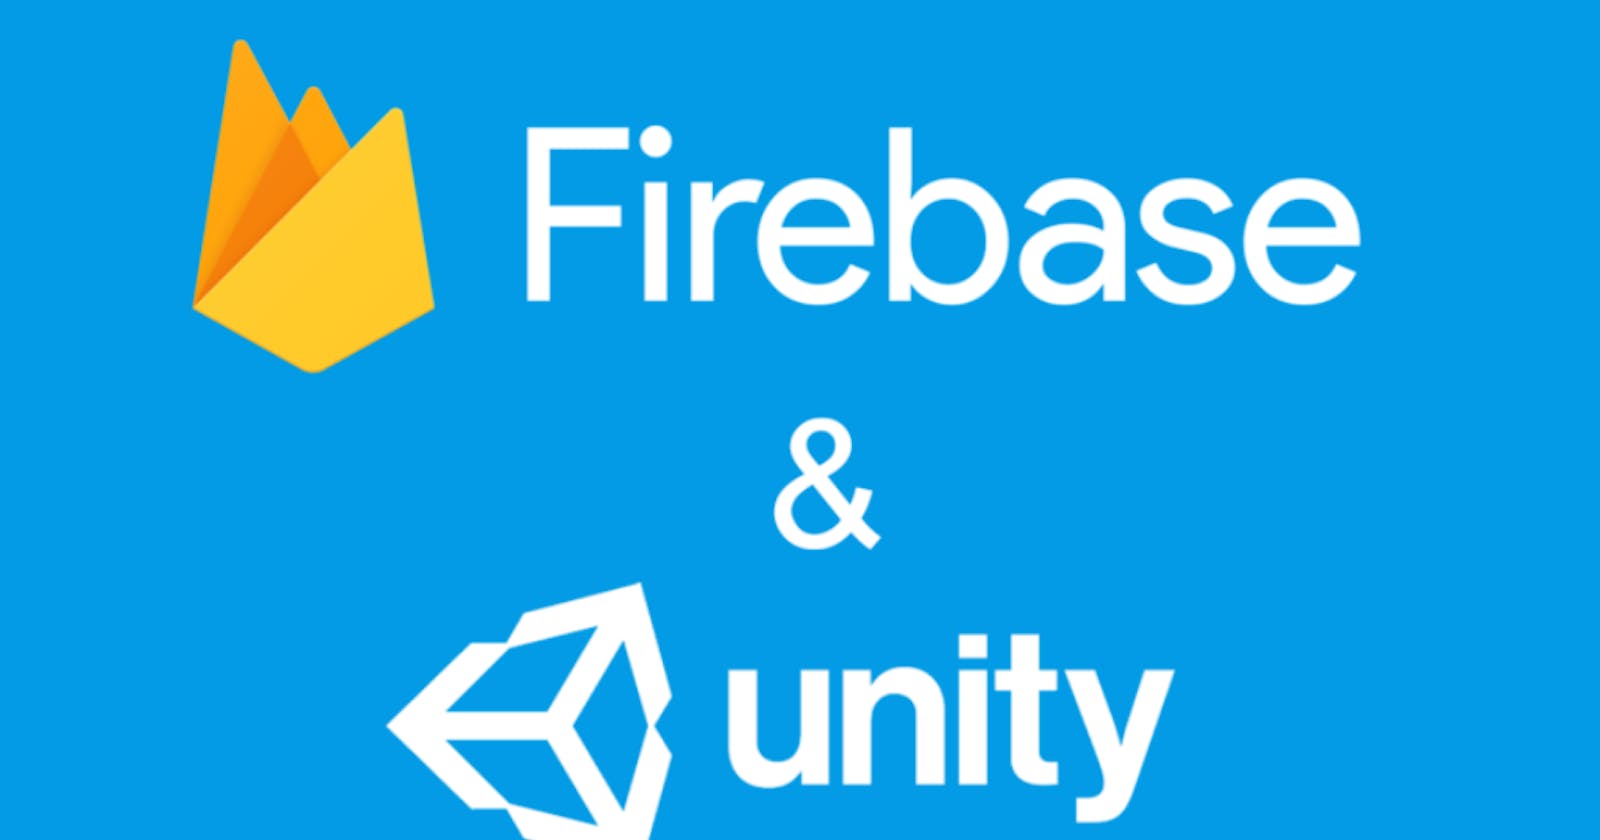 26/7/2021 - Creating User Authentication System using Firebase.